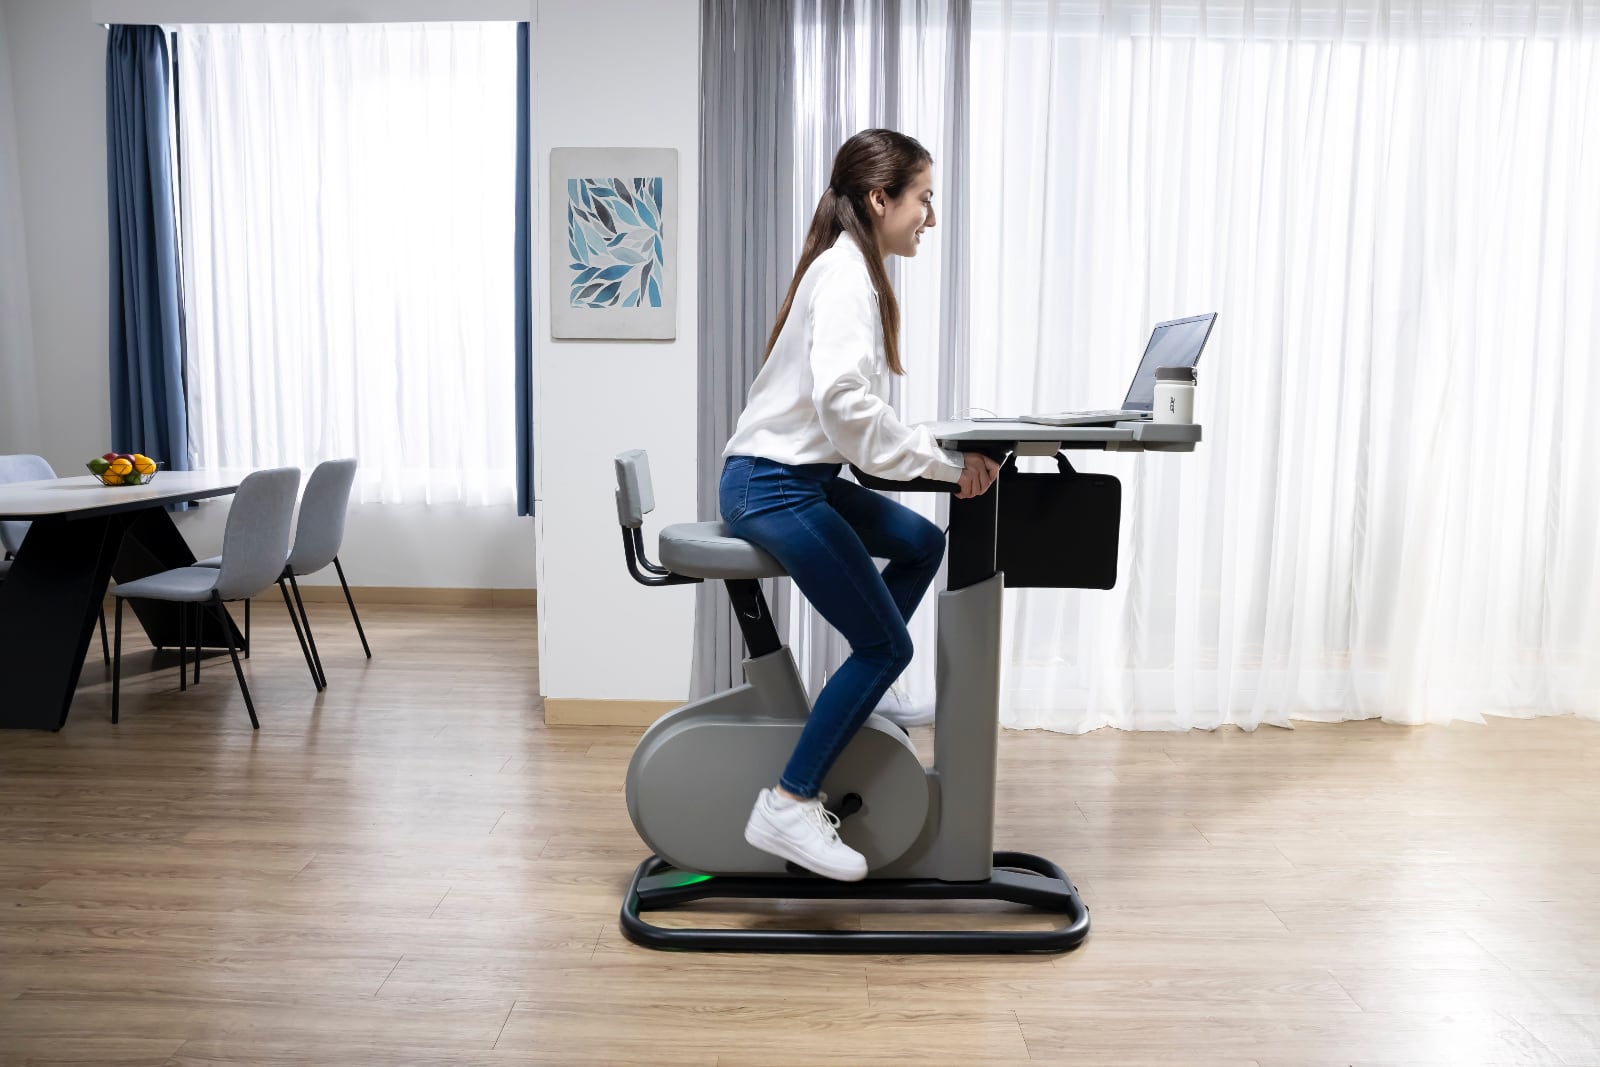 Acer Introduces eKinekt BD 3 Bike Desk. It converts energy from the rider’s pedaling power to charge laptop-3